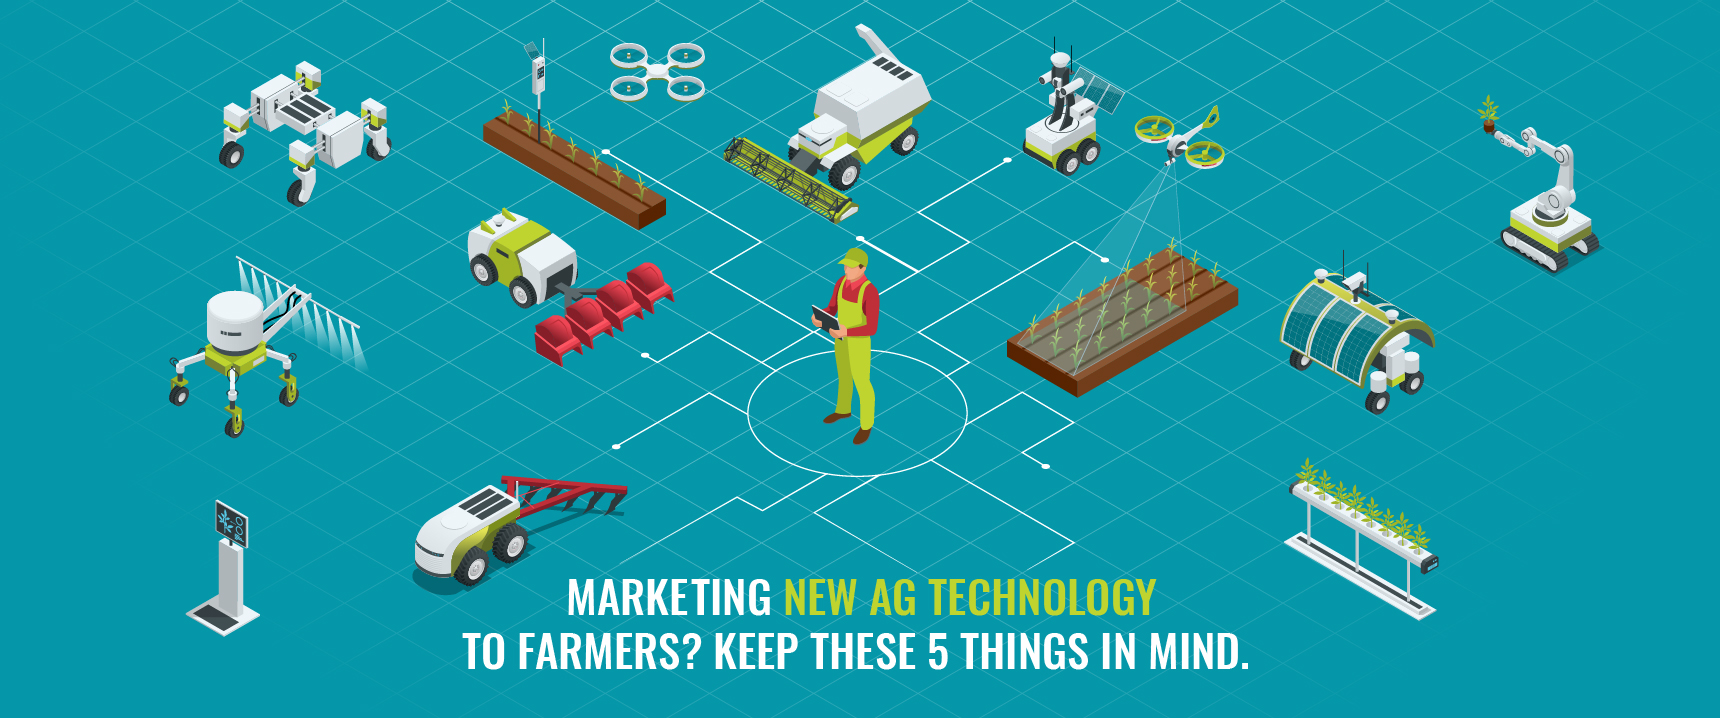 5 things to keep in mind when marketing new ag technology